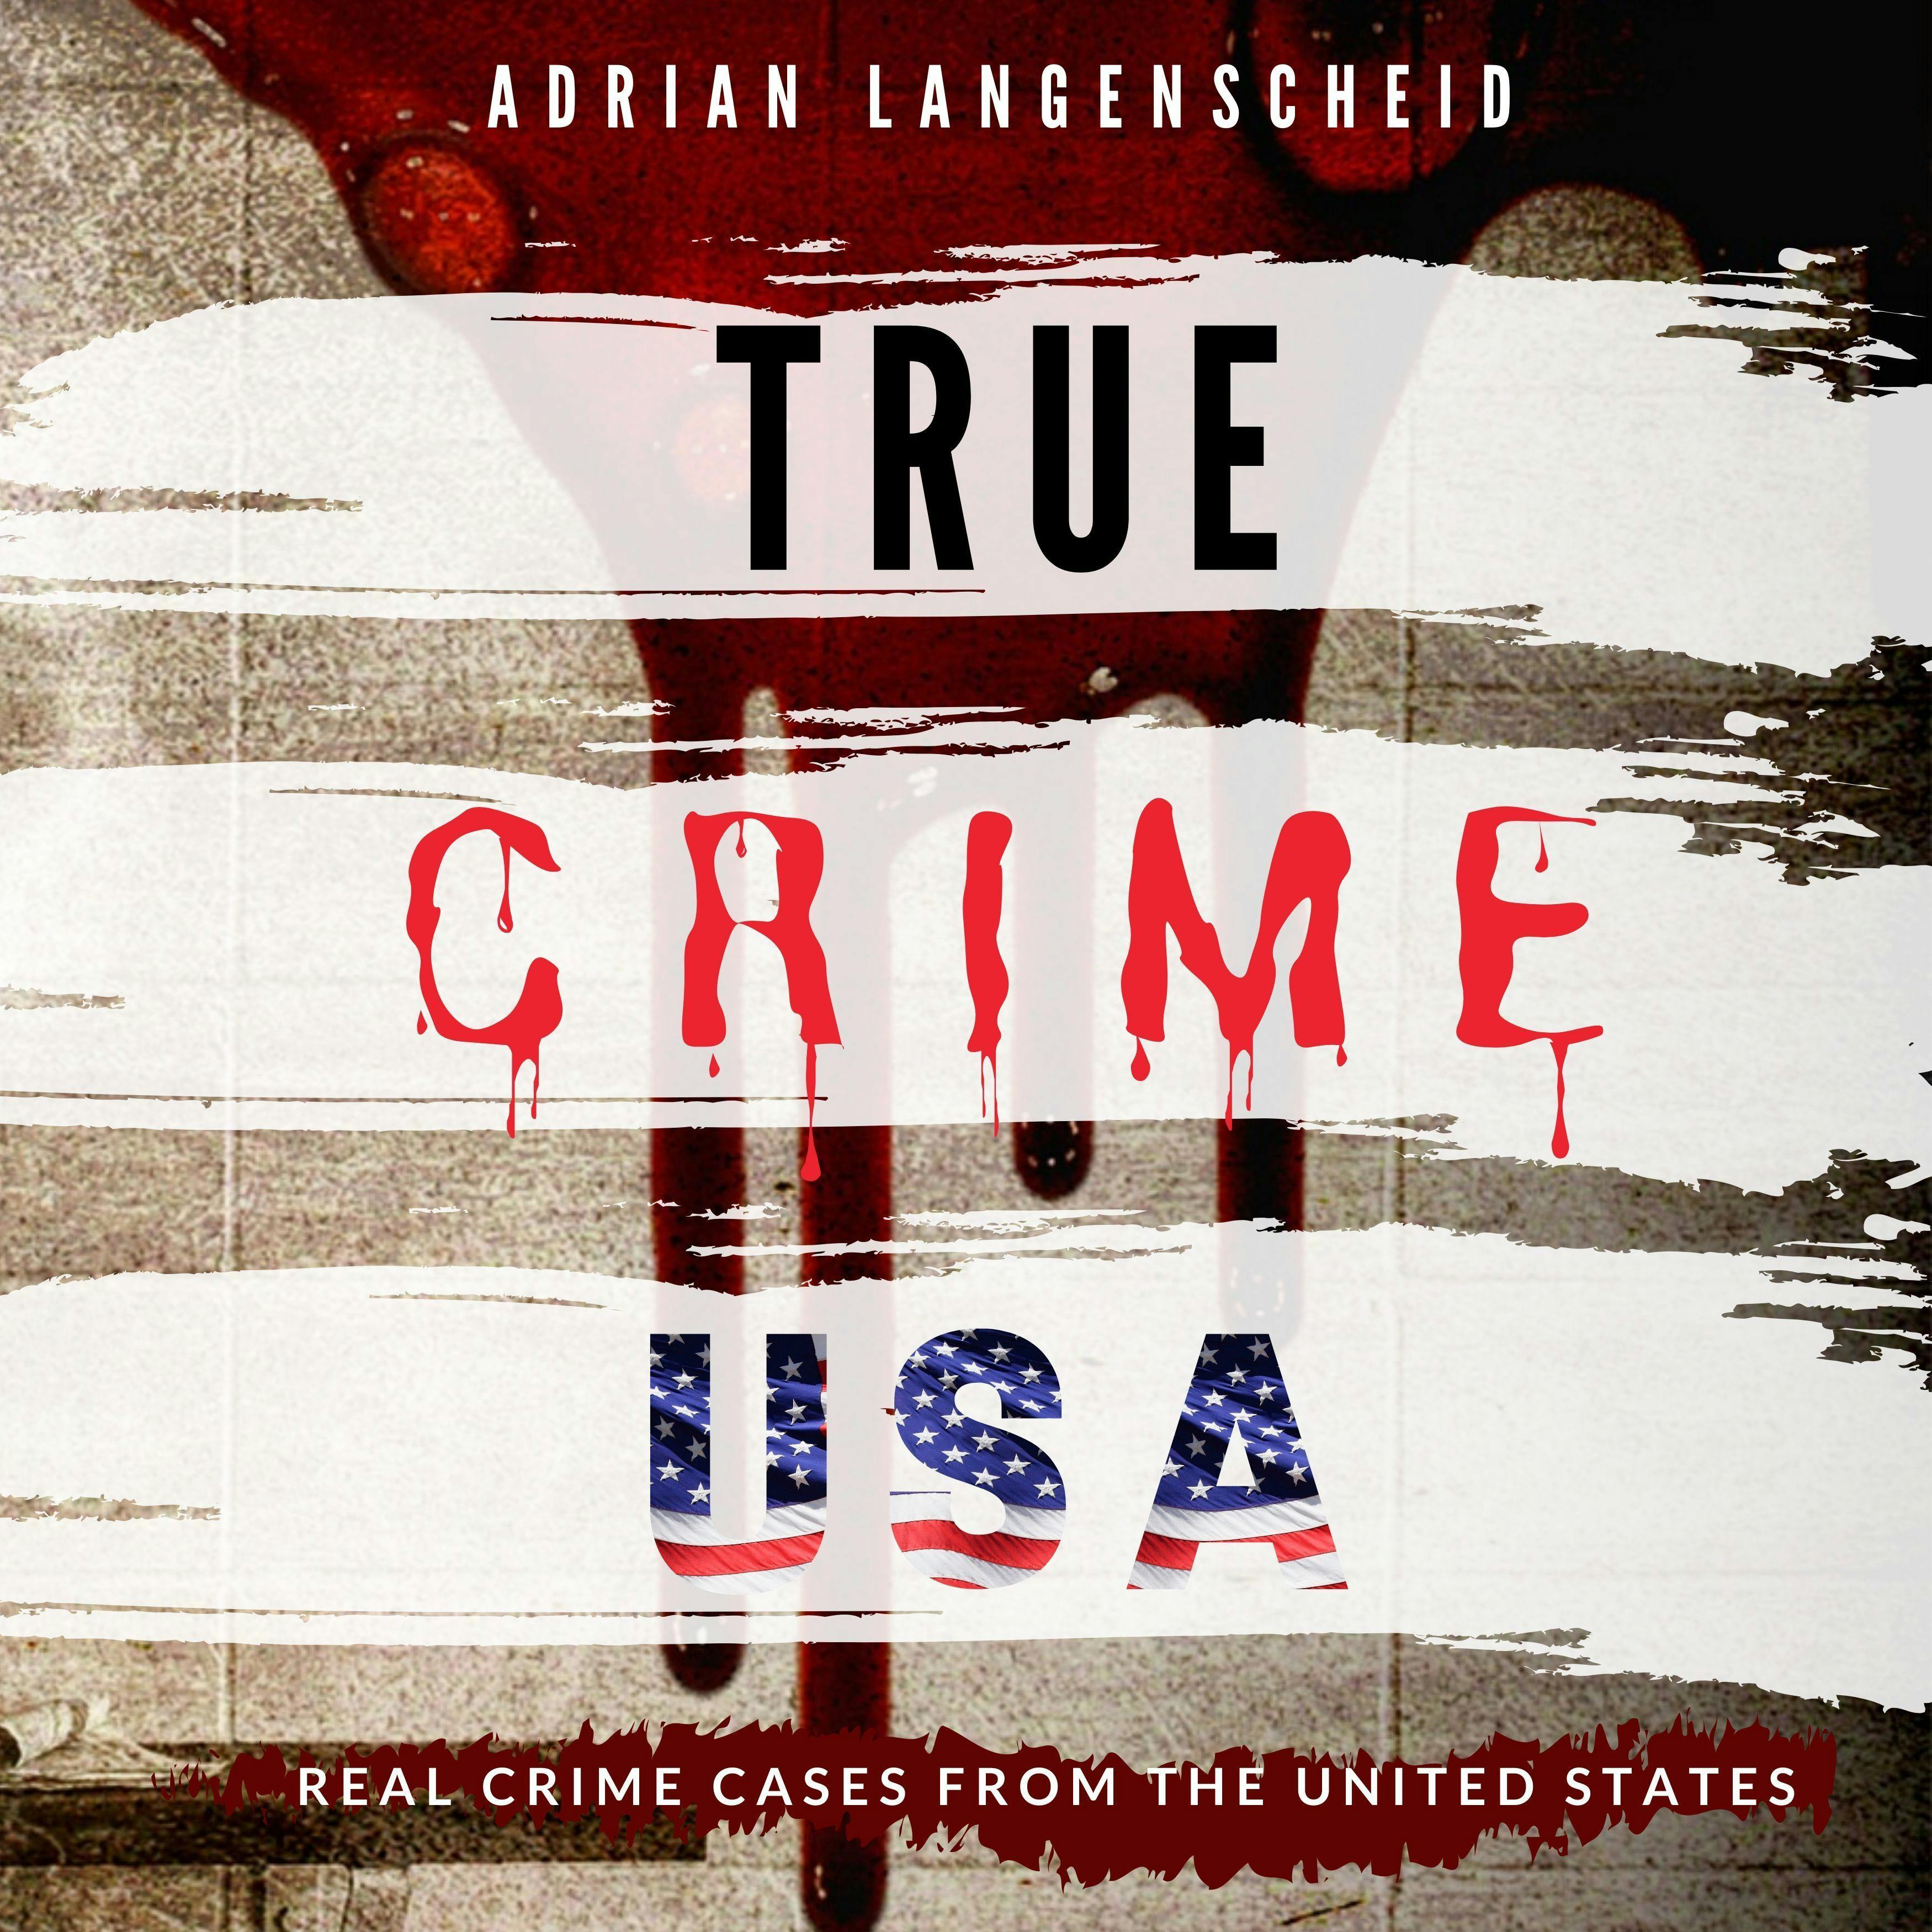 True Crime USA: Real Crime Cases from the United States - Adrian Langenscheid